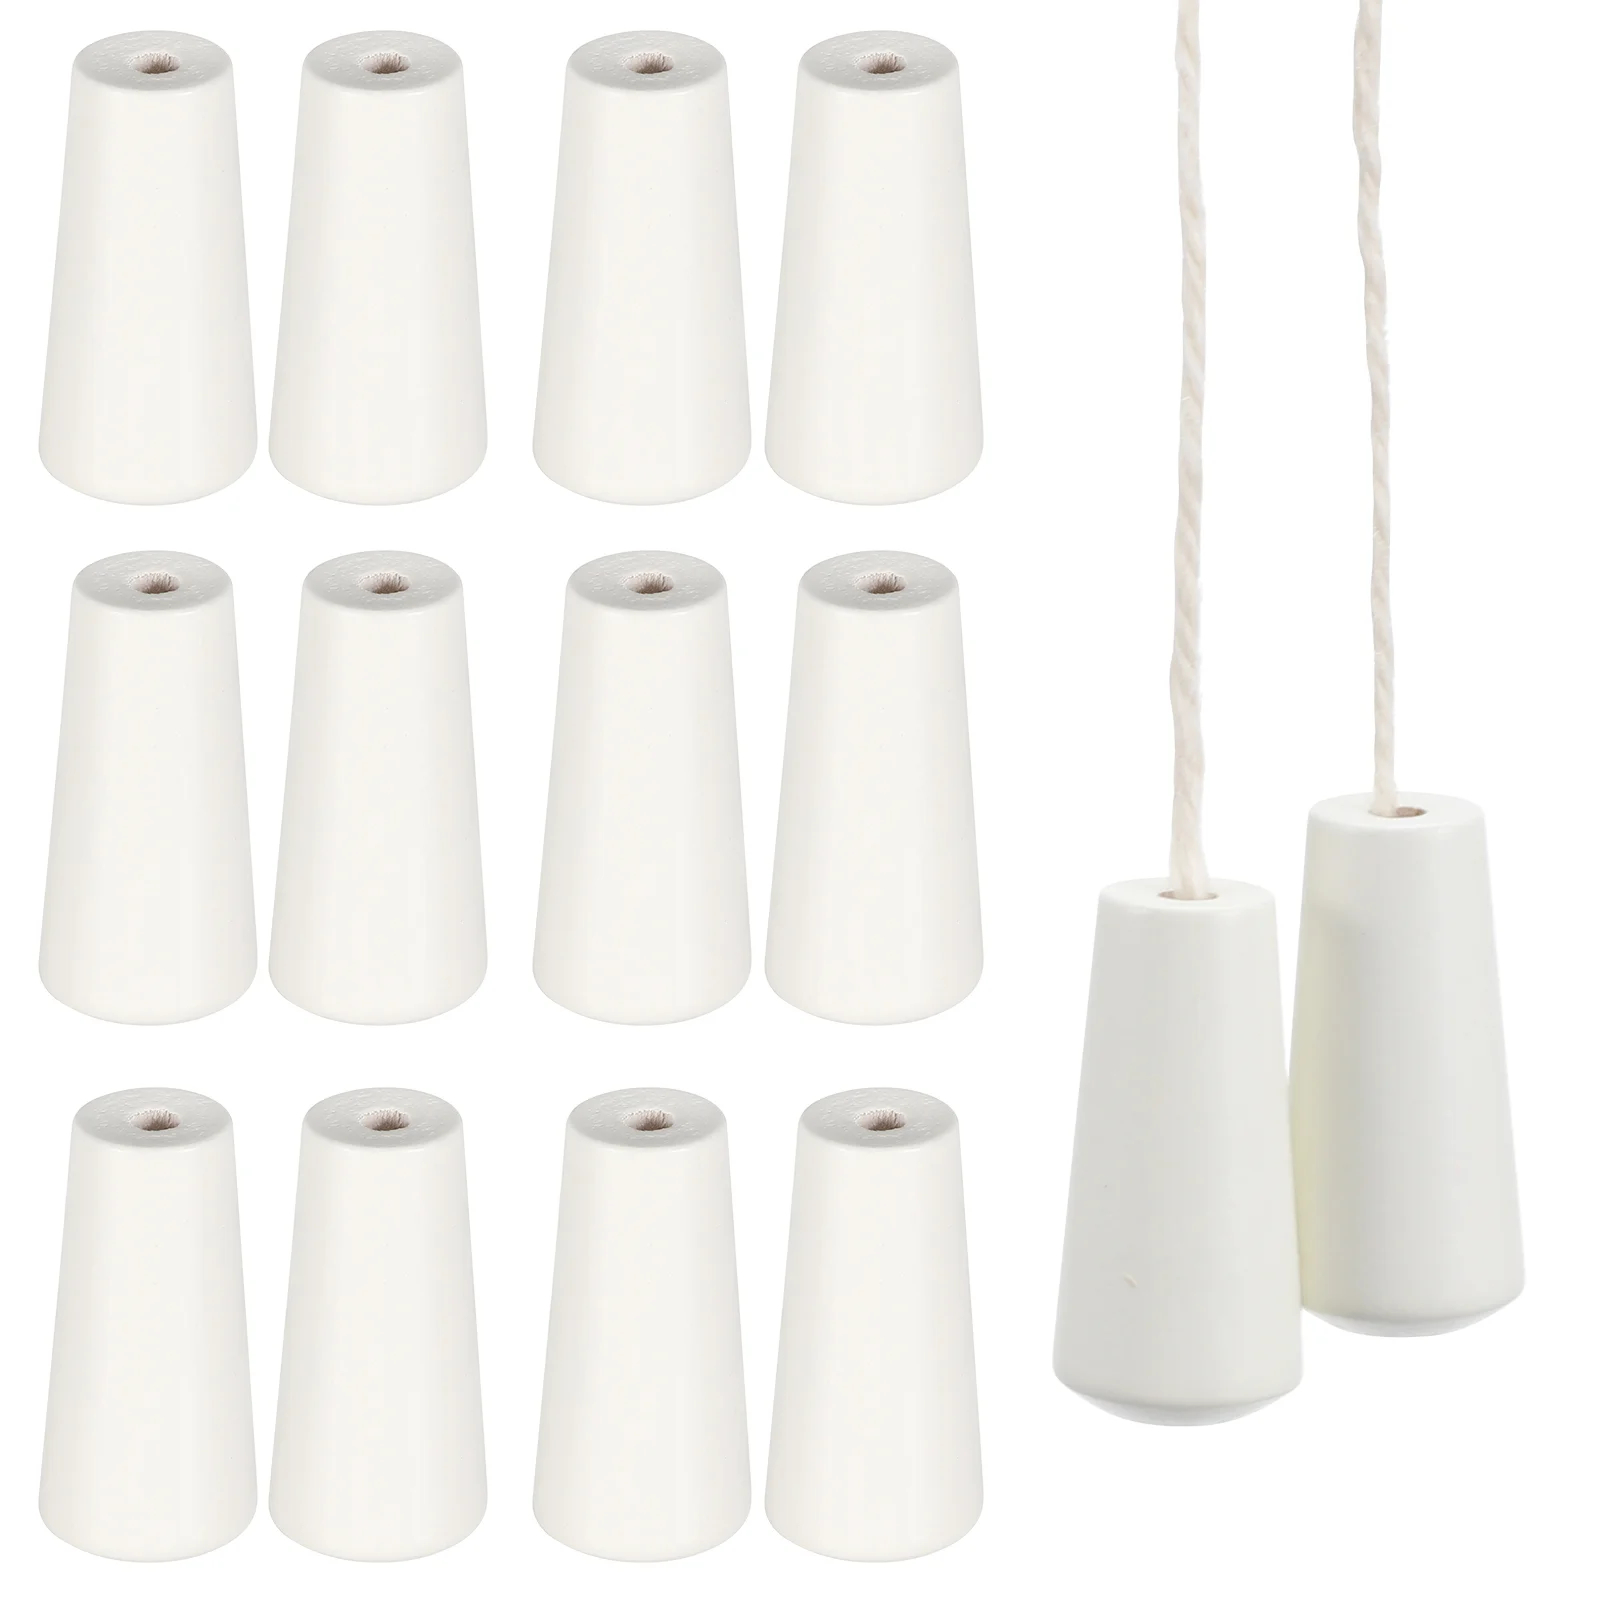 

12 Pcs White Accessories Wood Blind Small Pendants Pull Ends Wooden Ball Curtain Knob Hanging Pulls Cord Knobs